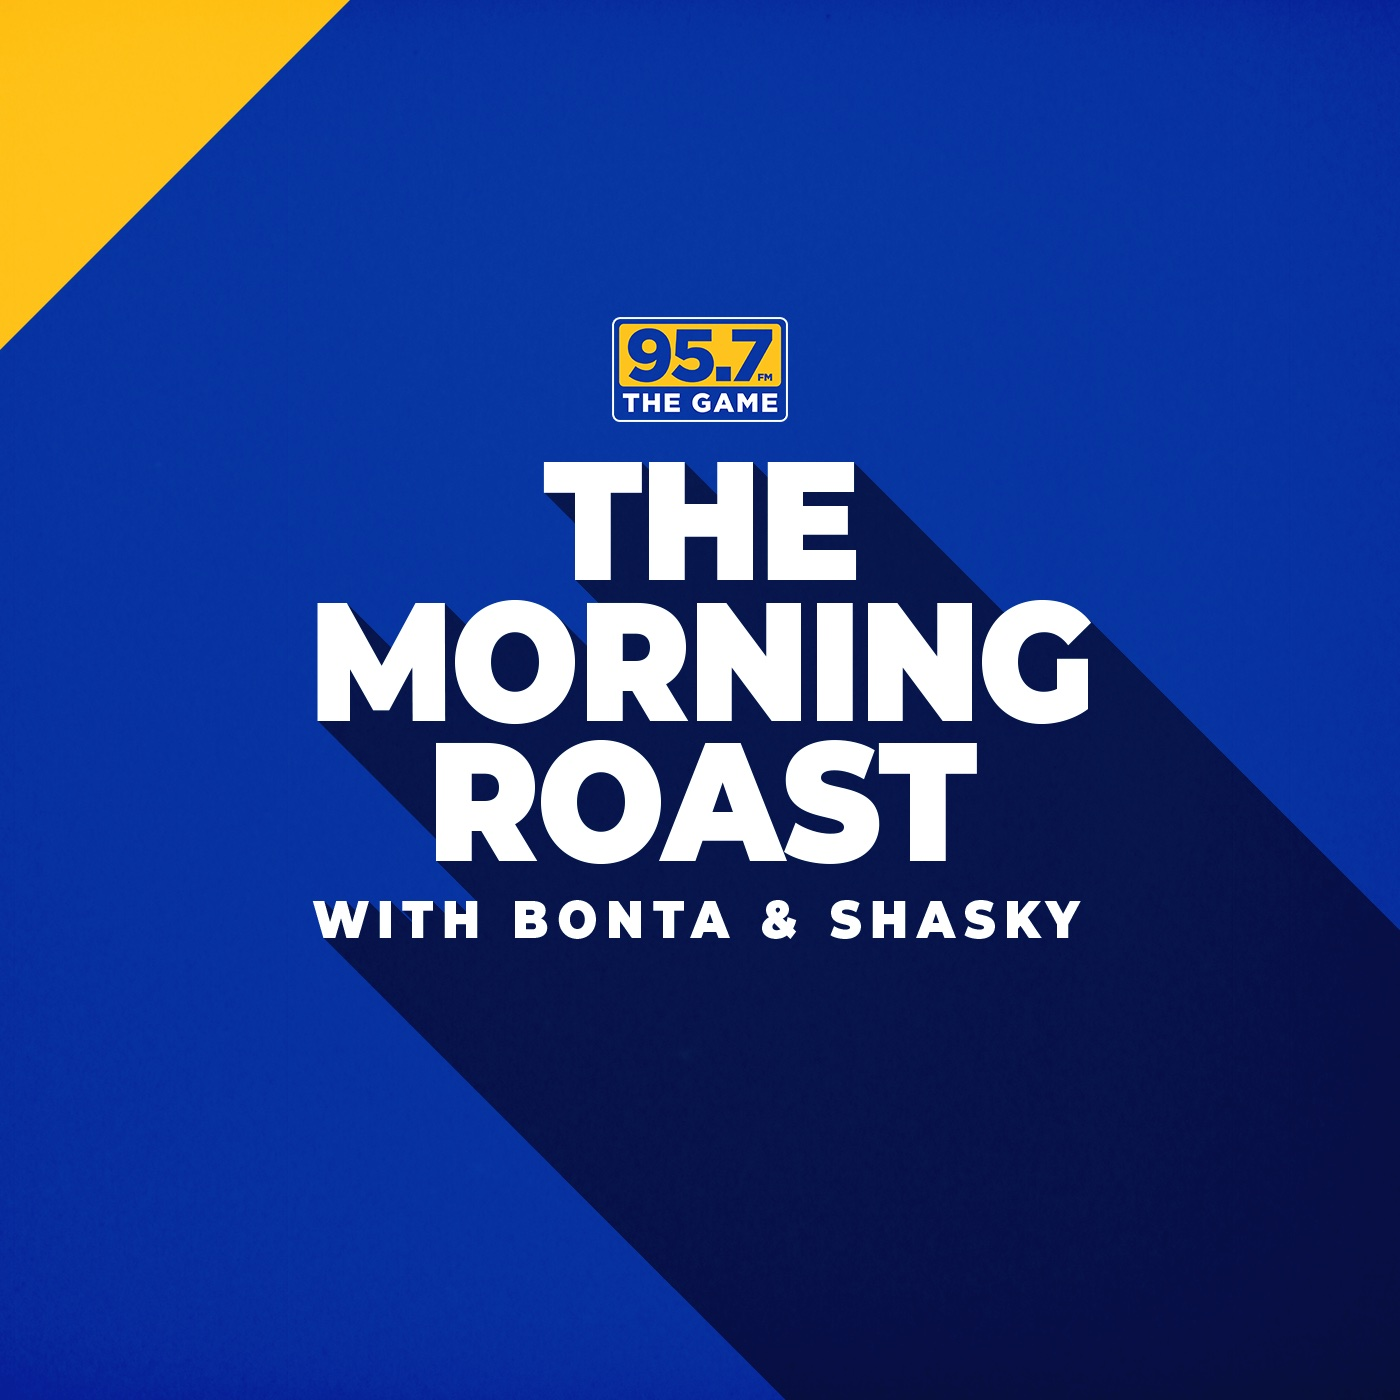 Phil Simms Joins The Morning Roast!